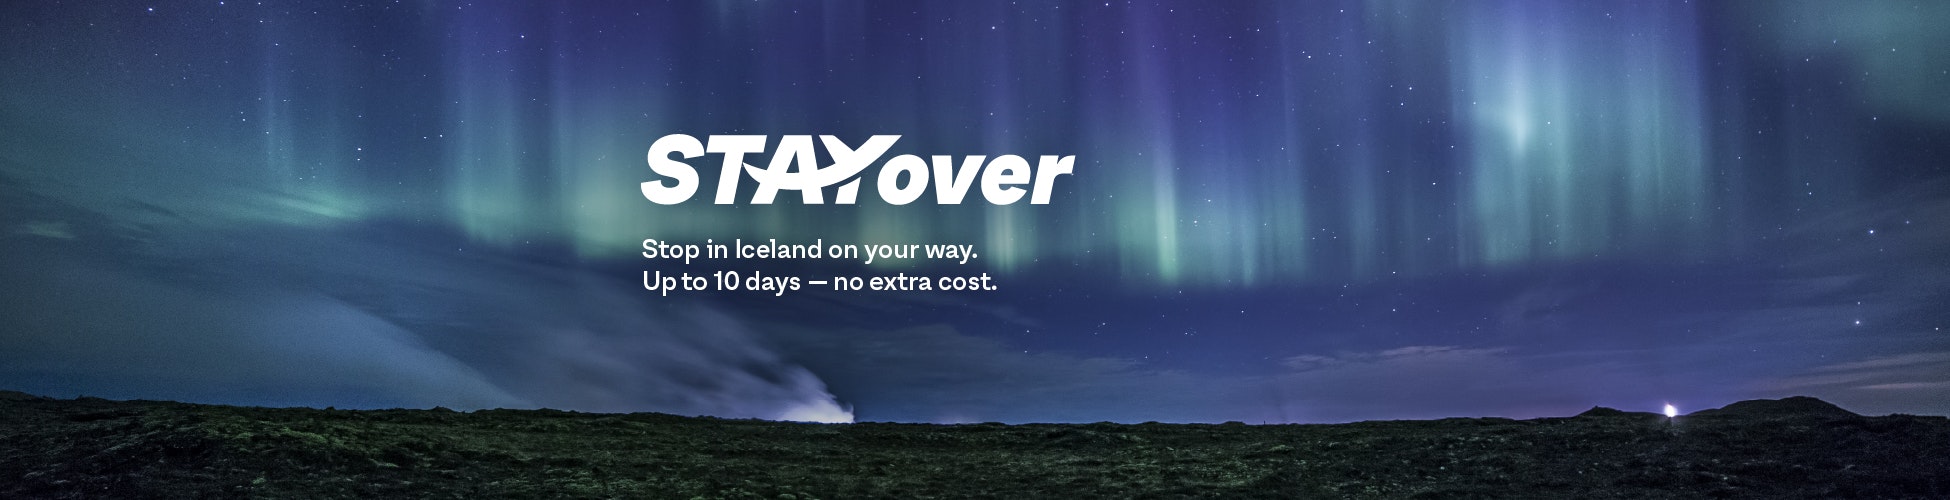 An image of northern lights in Iceland with the copy "Stayover. Stop in Iceland on your way. Up to 10 days - no extra cost."